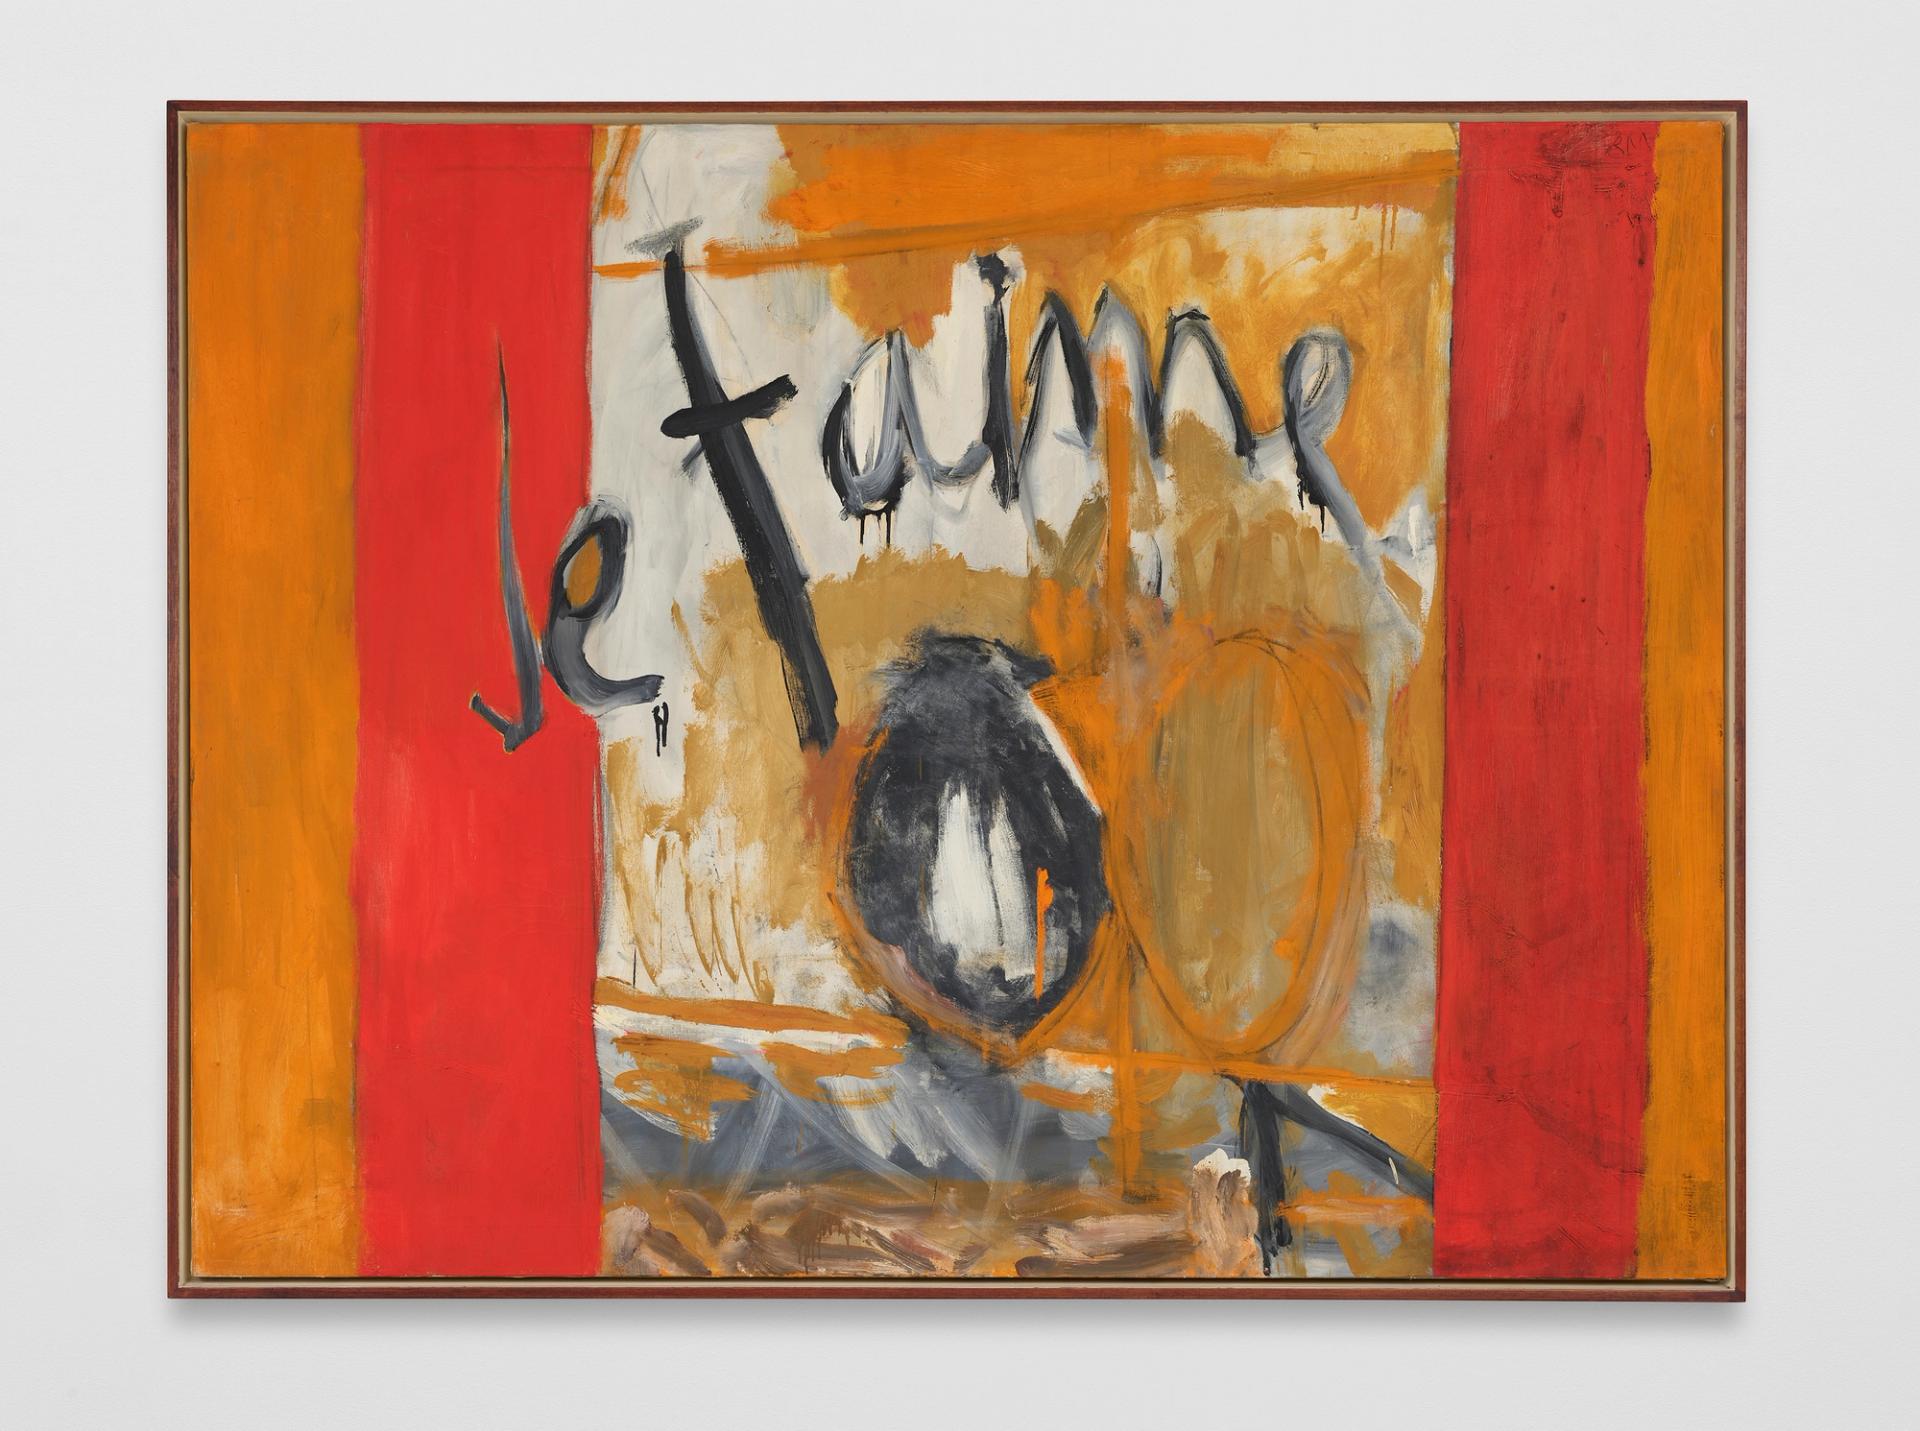 Pace gallery sold Robert Motherwell's Je t'aime No. II (1955) for $6.5m © Robert Motherwell, courtesy of Pace Gallery